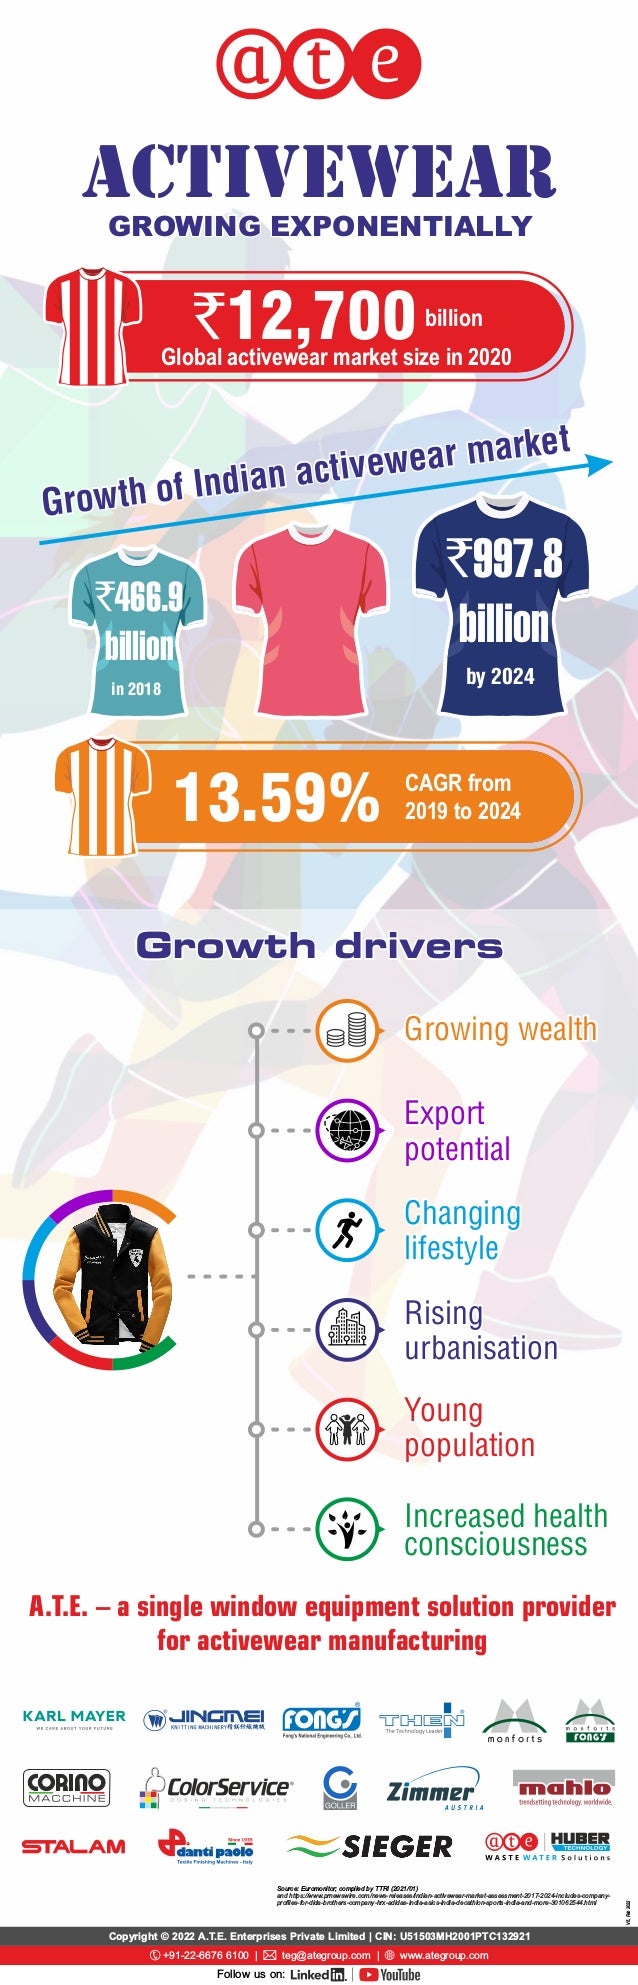 ACTIVEWEAR
ACTIVEWEAR
ACTIVEWEAR
Global activewear market size in 2020
`12,700billion
Growth drivers
Growth drivers
Growth drivers
A.T.E. – a single window equipment solution provider
A.T.E. – a single window equipment solution provider
for activewear manufacturing
for activewear manufacturing
A.T.E. – a single window equipment solution provider
for activewear manufacturing
`466.9
billion
in 2018
`997.8
billion
by 2024
Growth of Indian activewear market
Growth of Indian activewear market
Growth of Indian activewear market
CAGR from
2019 to 2024
13.59%
GROWING EXPONENTIALLY
GROWING EXPONENTIALLY
GROWING EXPONENTIALLY
Growing wealth
Growing wealth
Growing wealth
Export
Export
potential
potential
Export
potential
Changing
Changing
lifestyle
lifestyle
Changing
lifestyle
Rising
Rising
urbanisation
urbanisation
Rising
urbanisation
Increased health
Increased health
consciousness
consciousness
Increased health
consciousness
Young
Young
population
population
Young
population
V5,
Feb
2022
and https://www.prnewswire.com/news-releases/indian-activewear-market-assessment-2017-2024-includes-company-
proﬁles-for-dida-brothers-company-hrx-adidas-india-asics-india-decathlon-sports-india-and-more-301062544.html
Source: Euromonitor; compiled by TTRI (2021/01)
Copyright © 2022 A.T.E. Enterprises Private Limited | CIN: U51503MH2001PTC132921
+91-22-6676 6100 | teg@ategroup.com | www.ategroup.com
Follow us on: ®
 